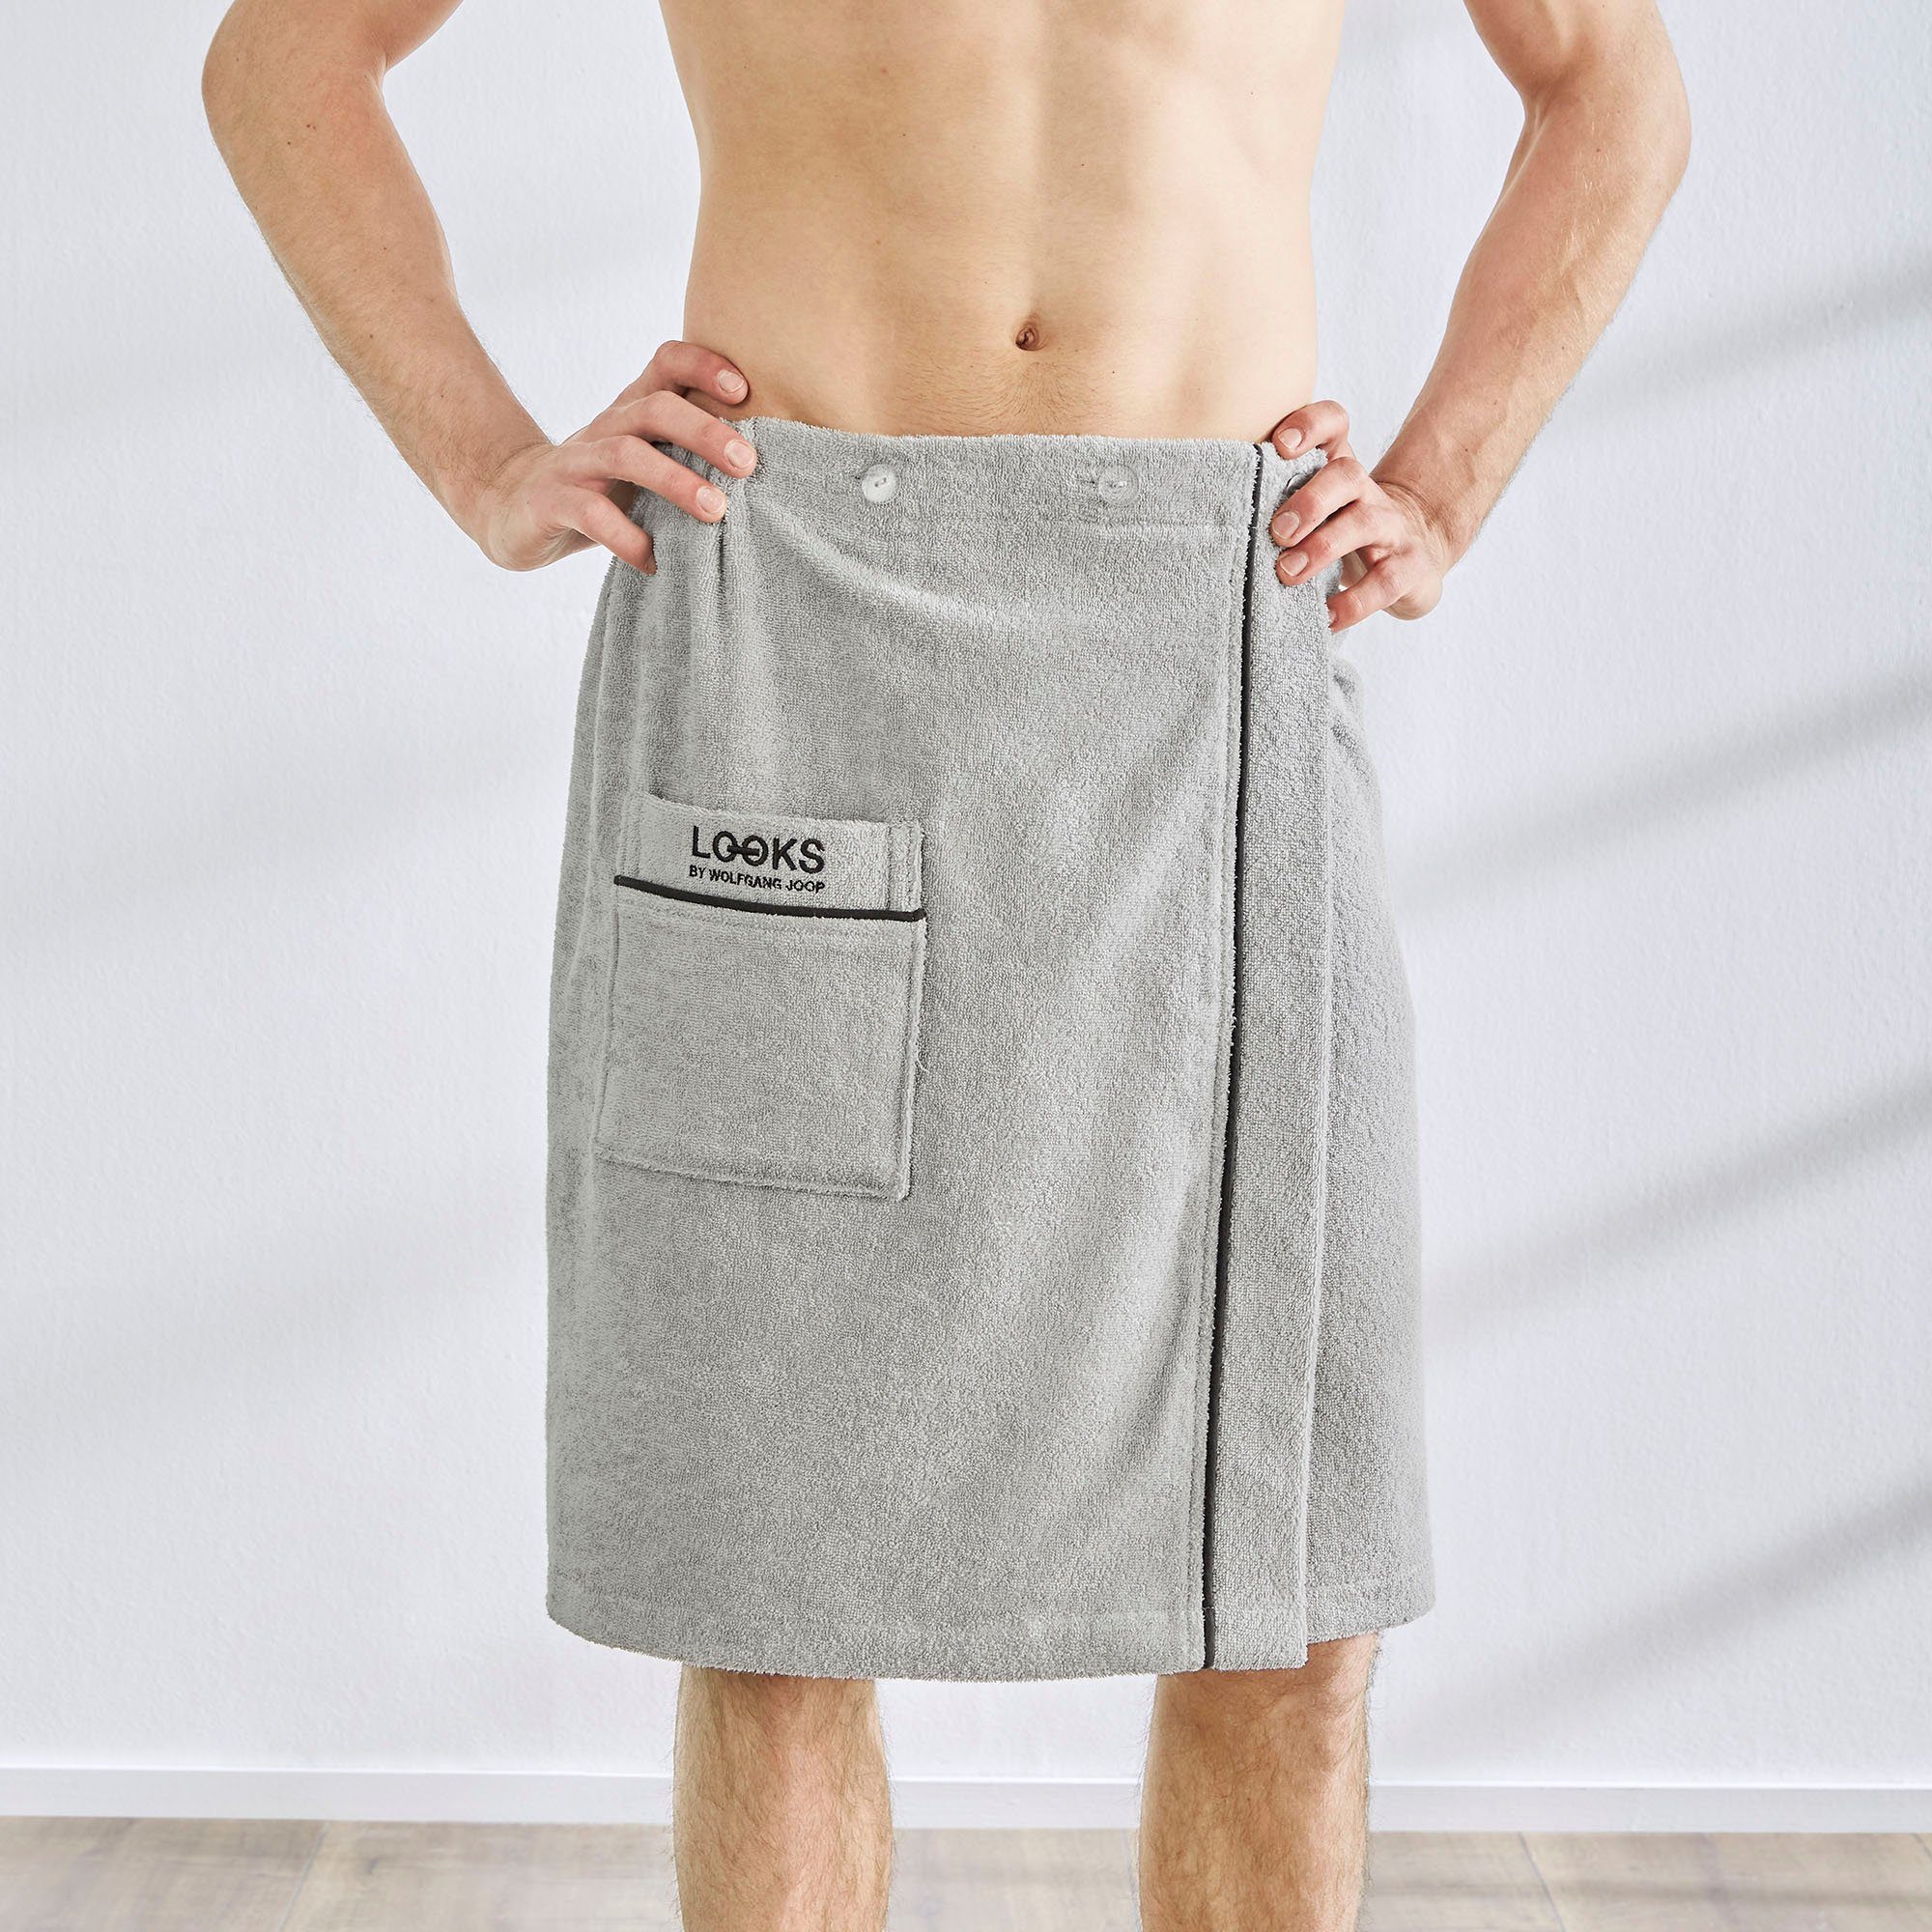 Heimtextilien Sarongs Sarong LOOKS by Wolfgang Joop, LOOKS by Wolfgang Joop, kuschelweich